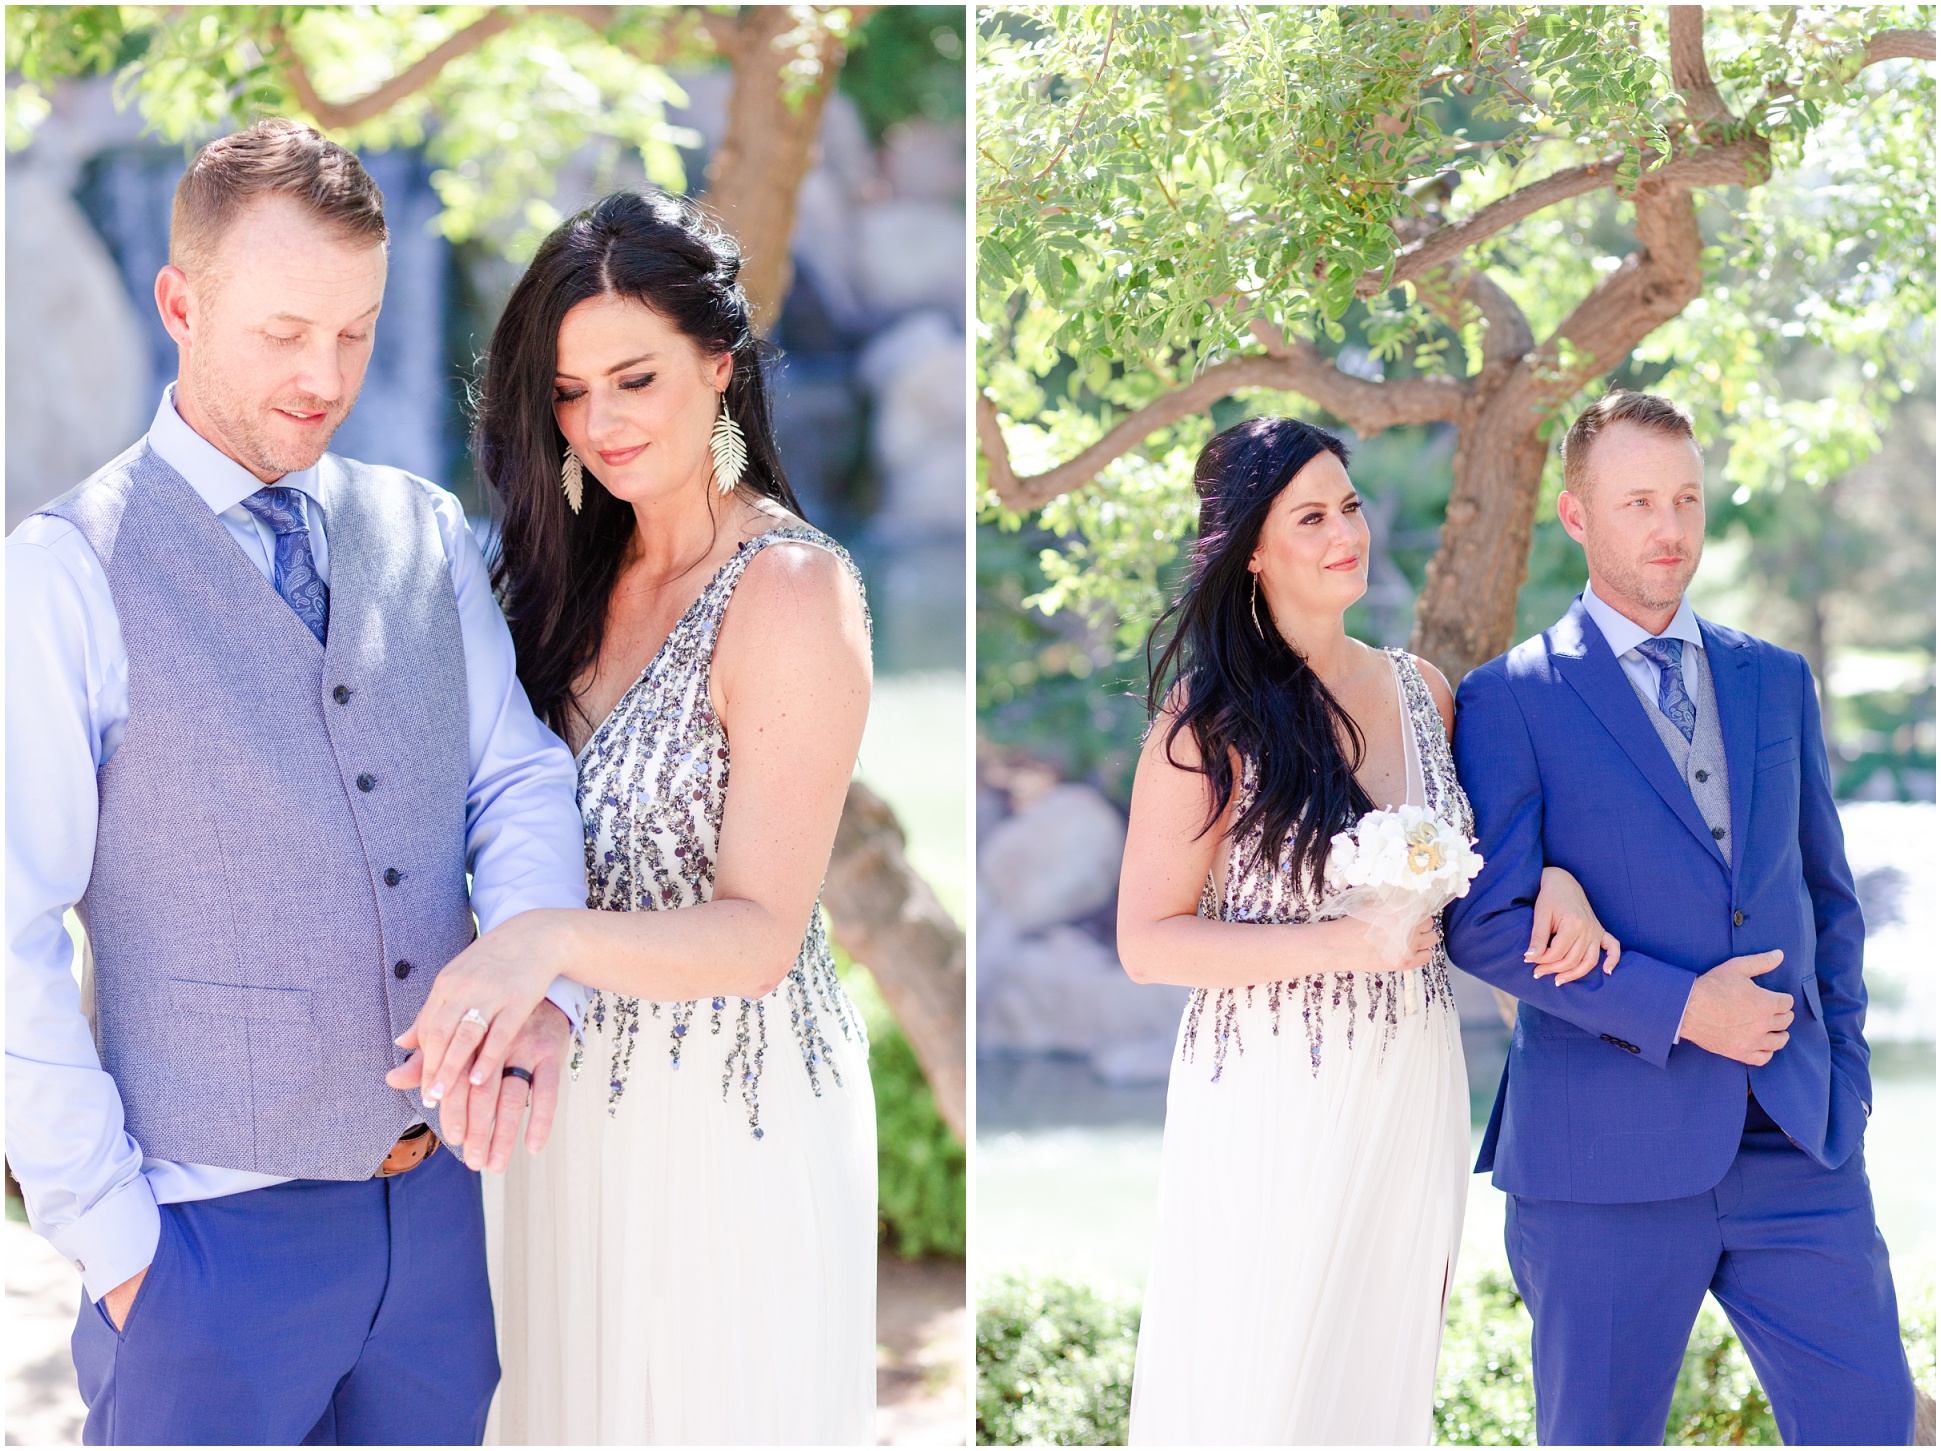 Two photos of Holli and JB during their ceremony at the Friendship Garden